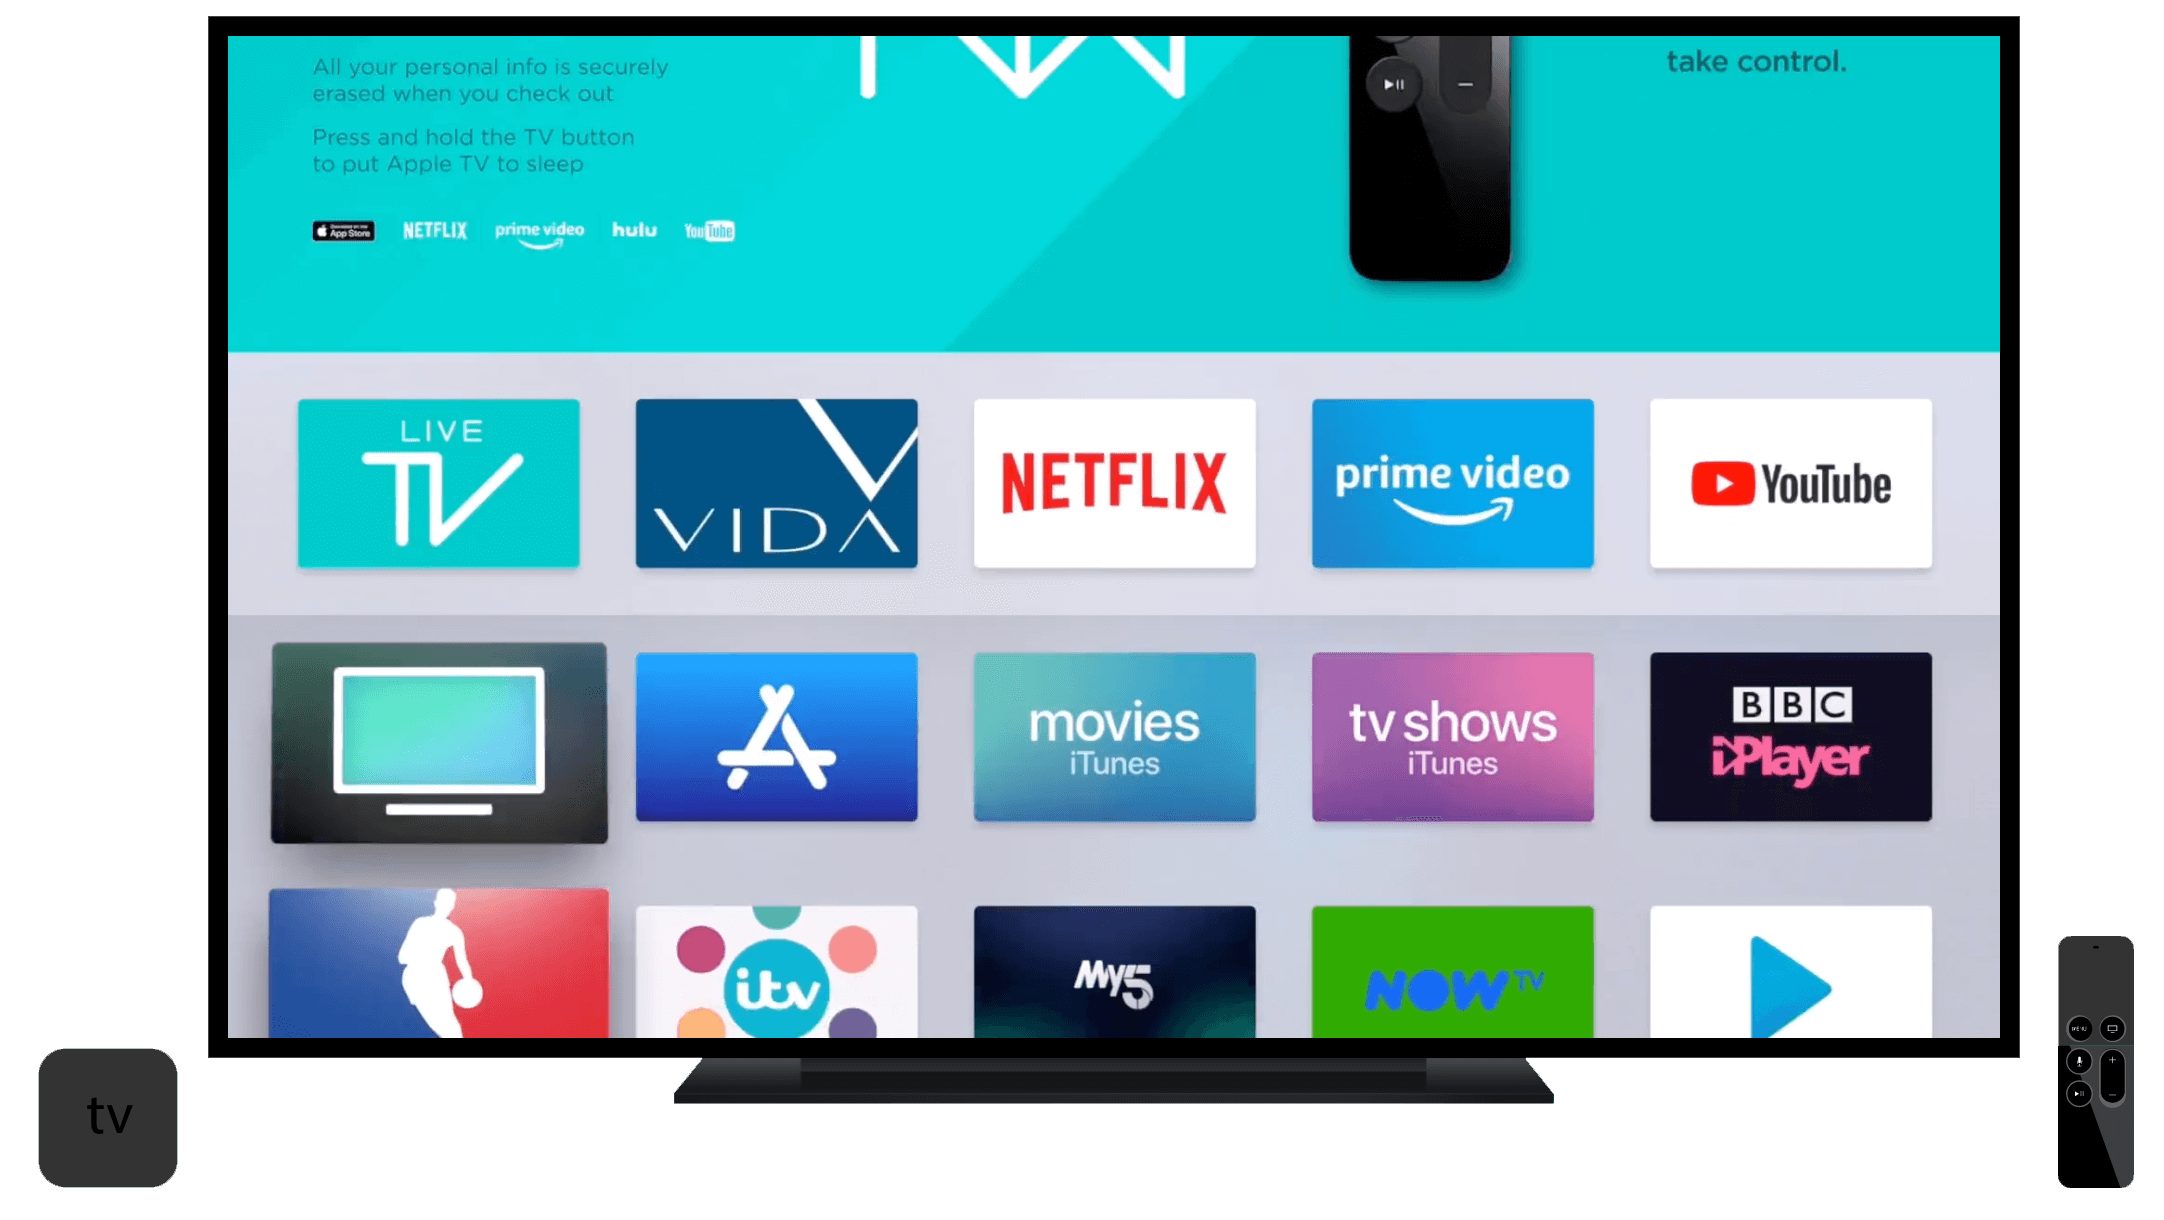 activate my5 tv on apple tv